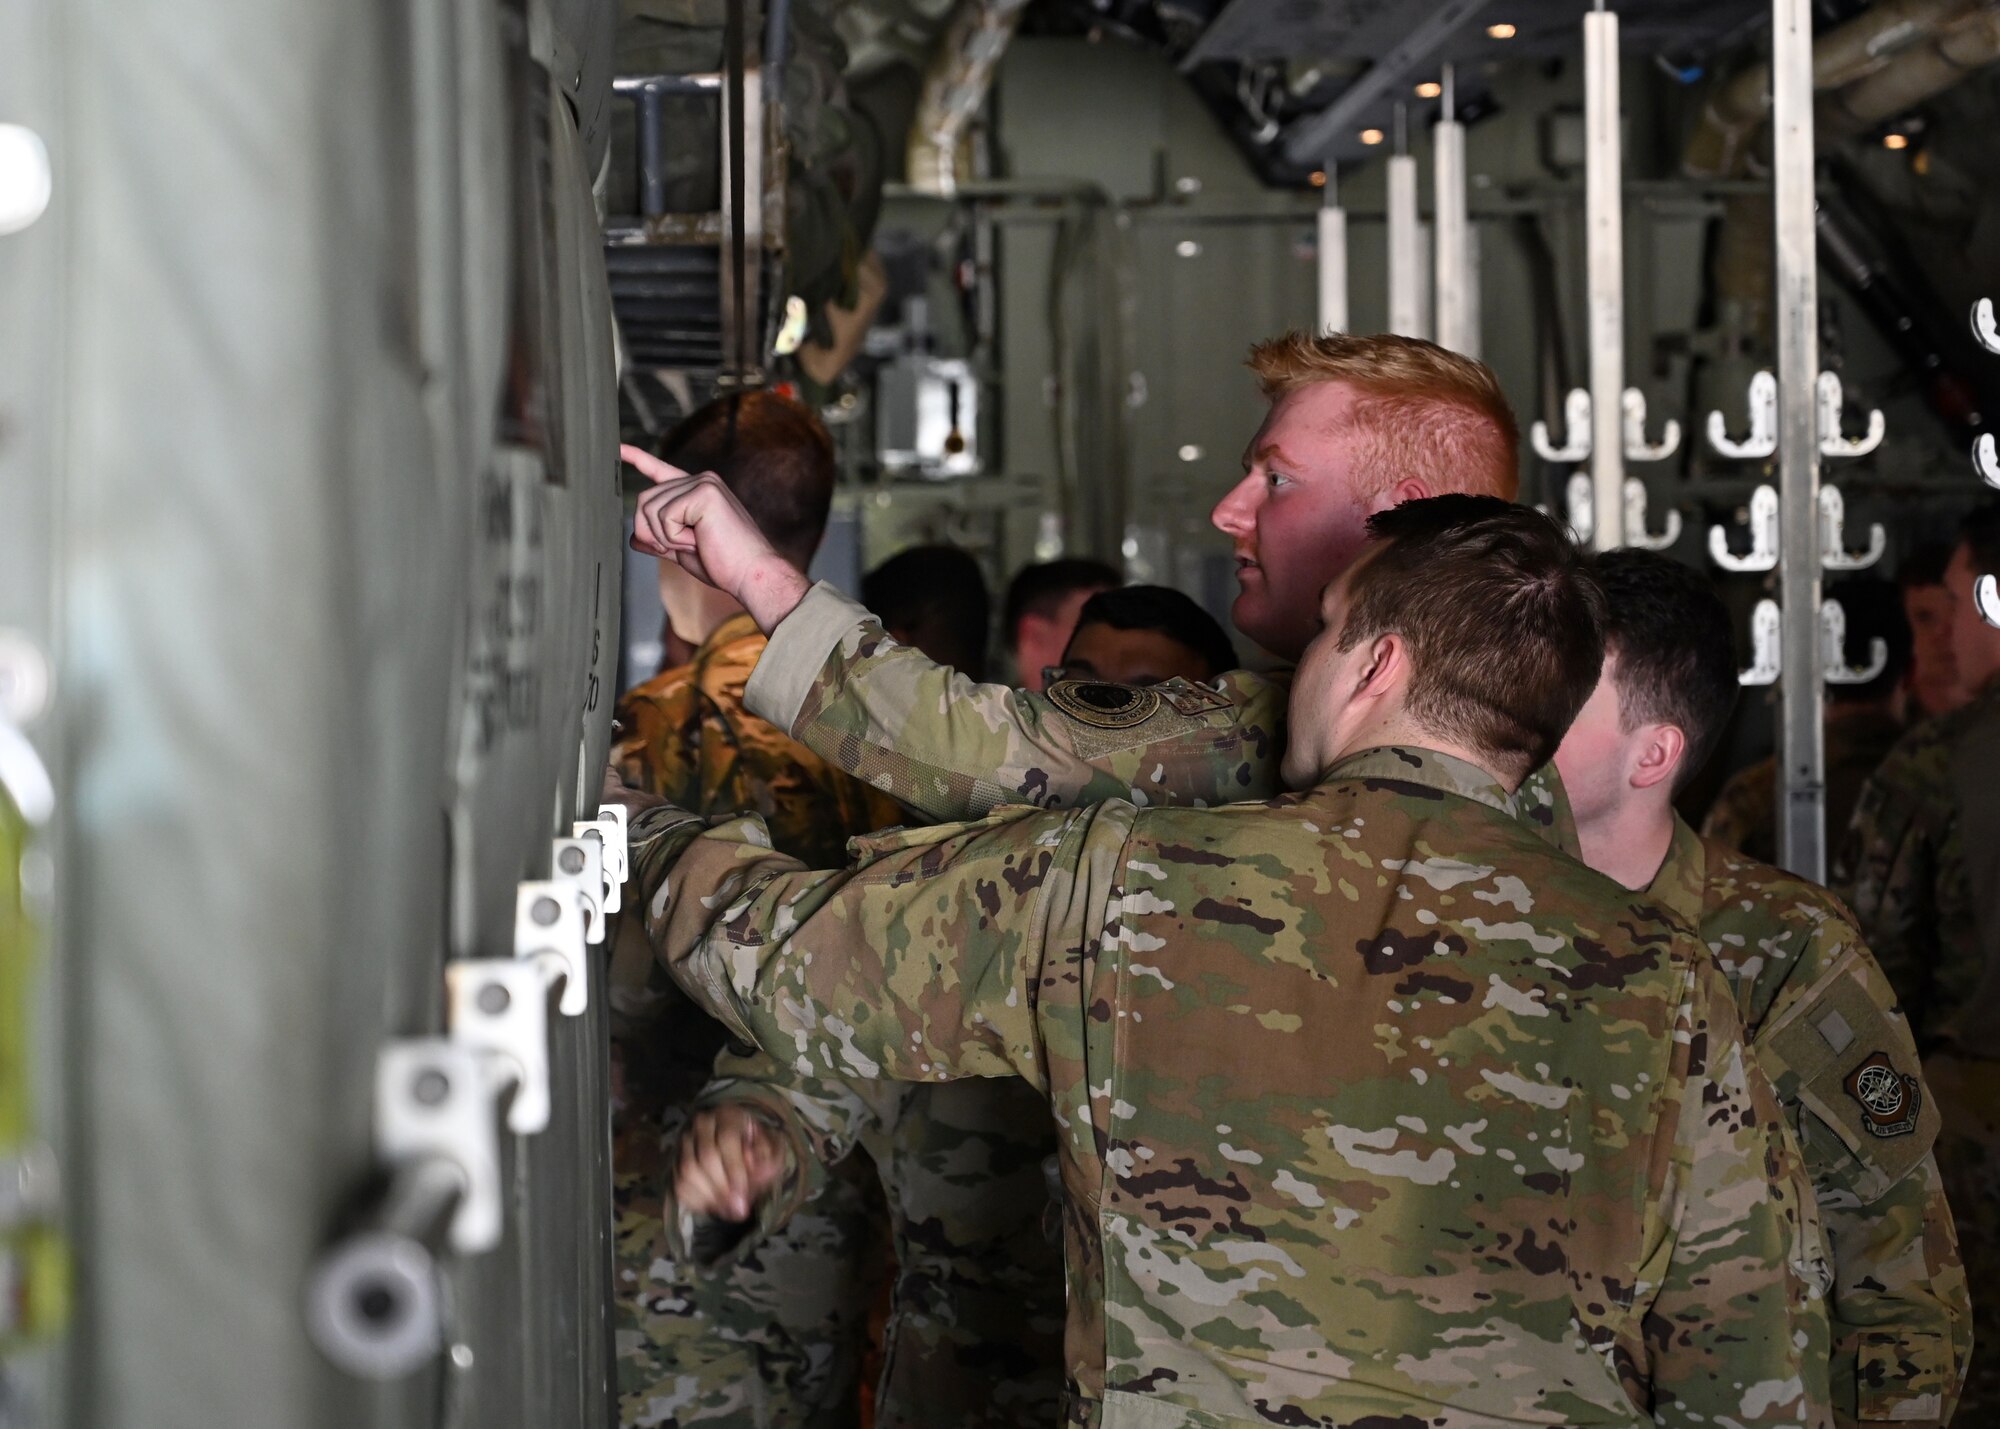 Loadmasters and pilots from the 41st Airlift Squadron work together to set up chairs in a C-130J Super Hercules